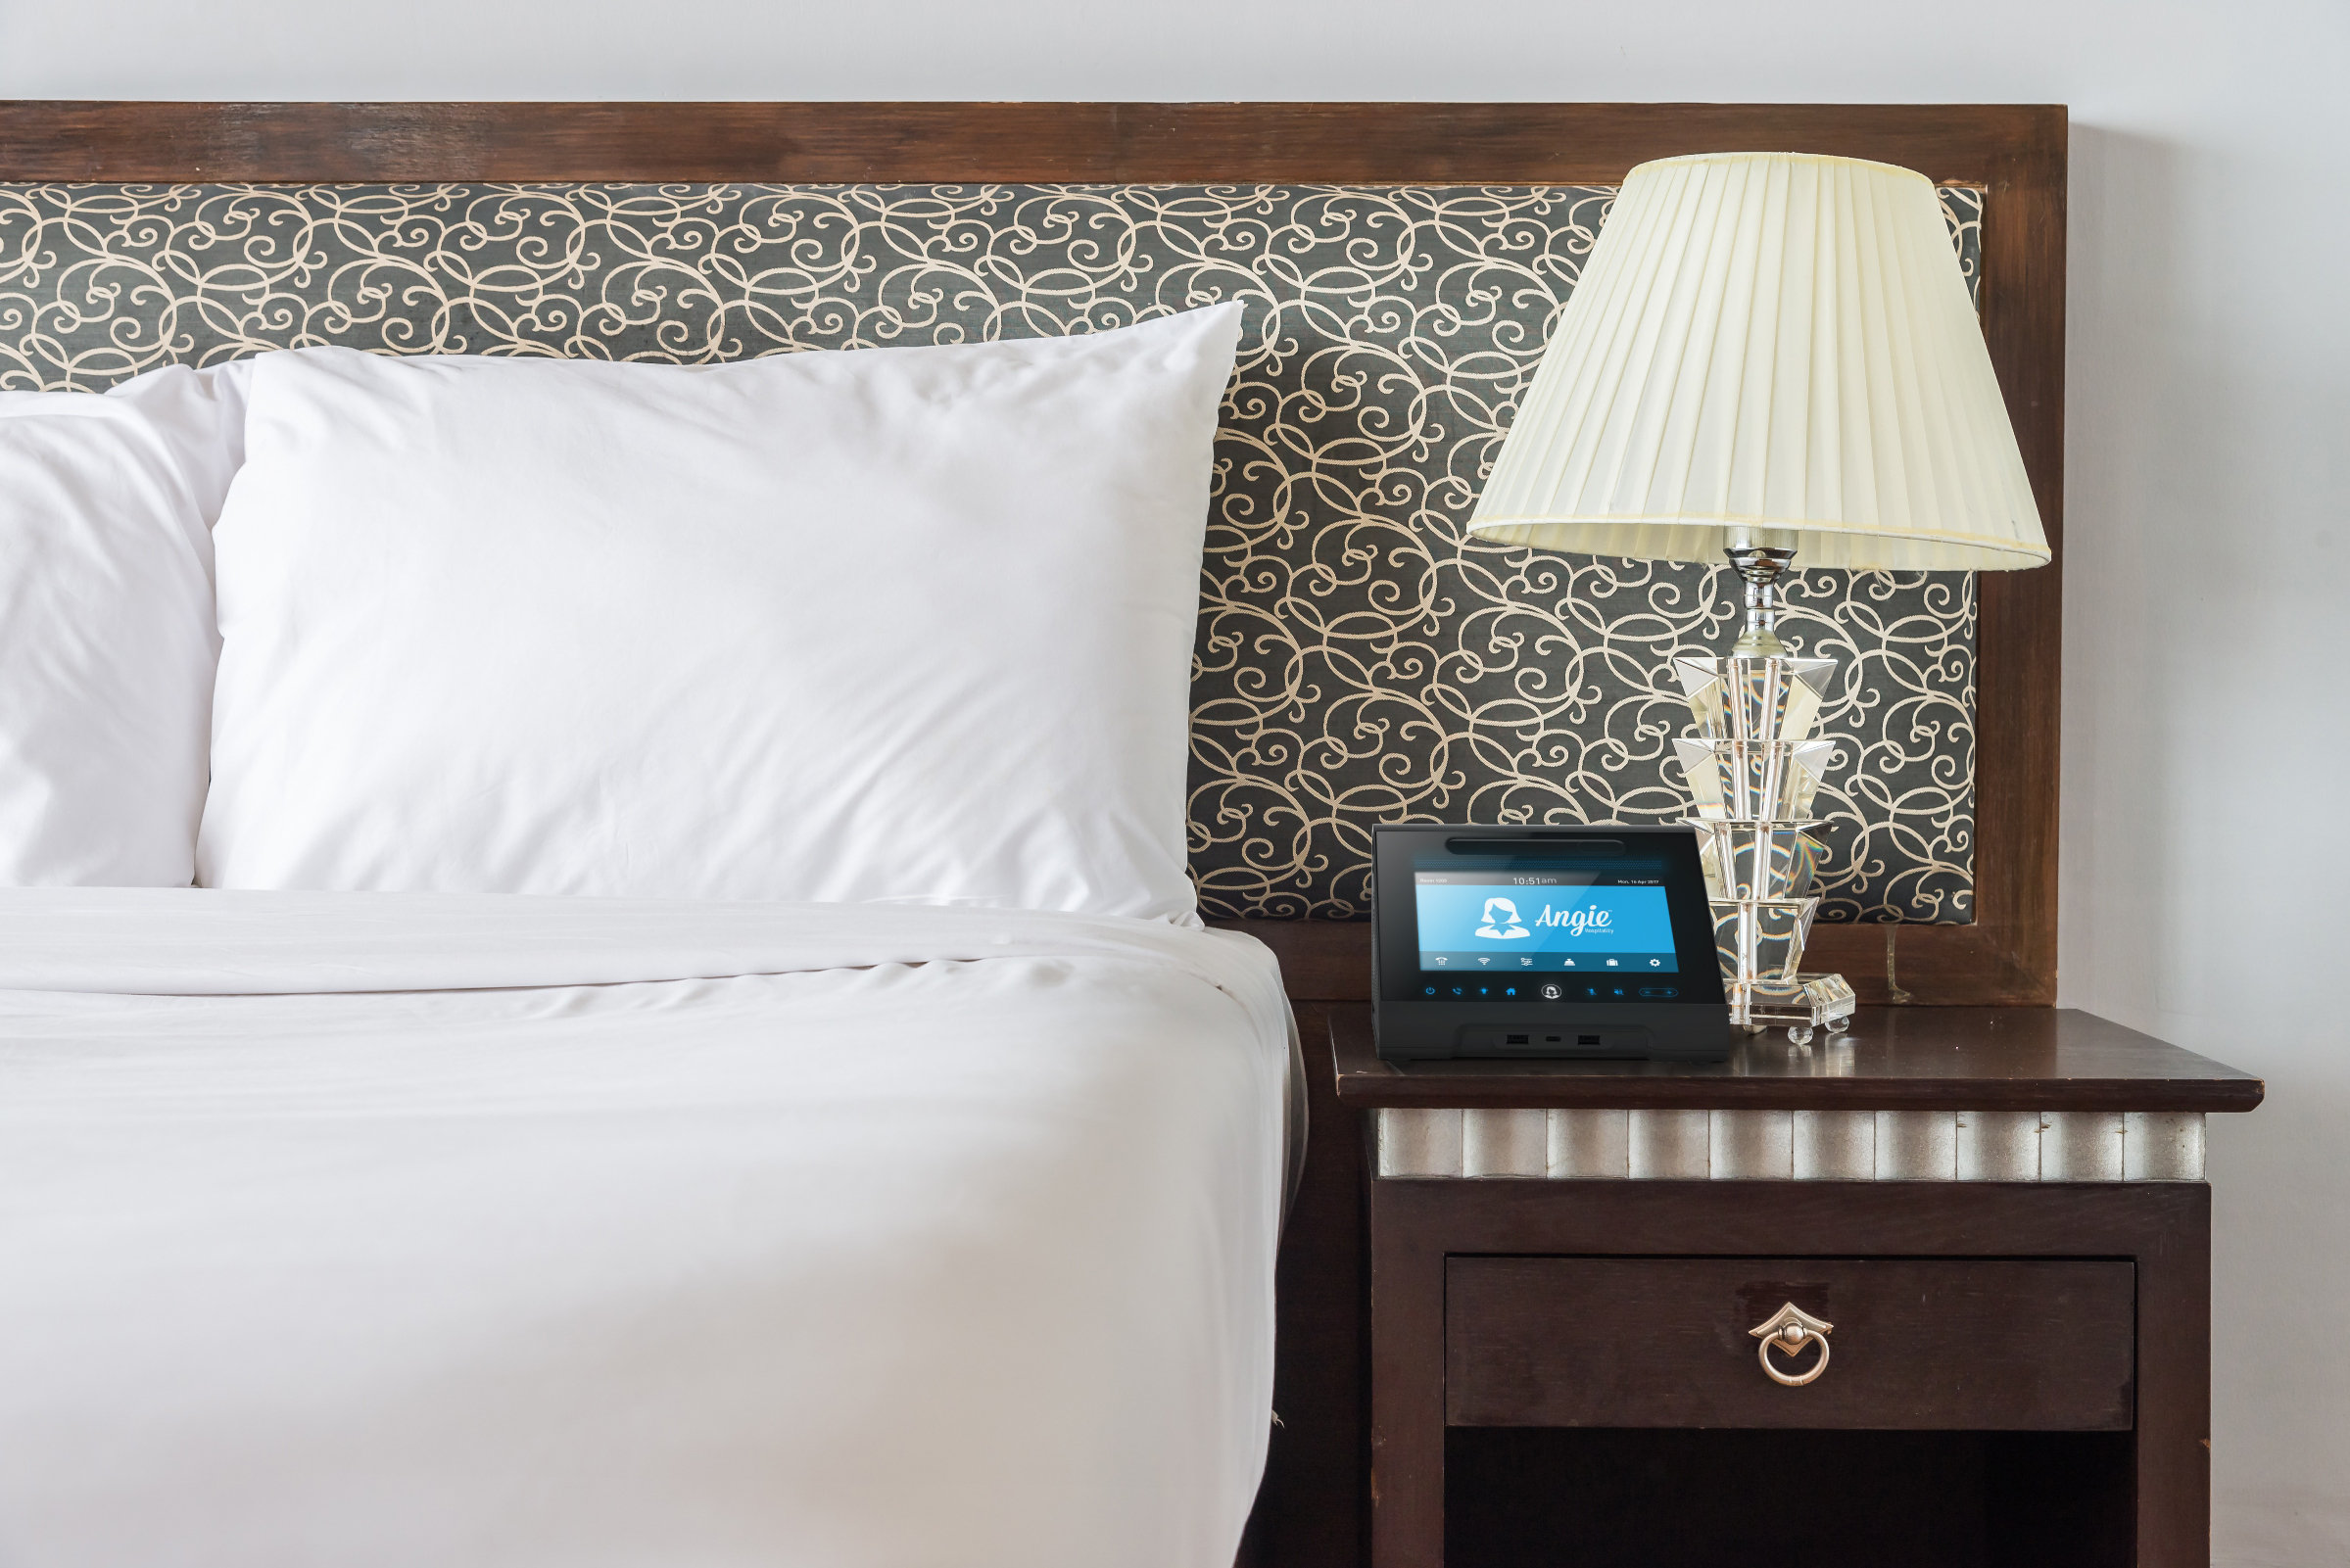 Angie introduces new features in next-gen guestroom assistant